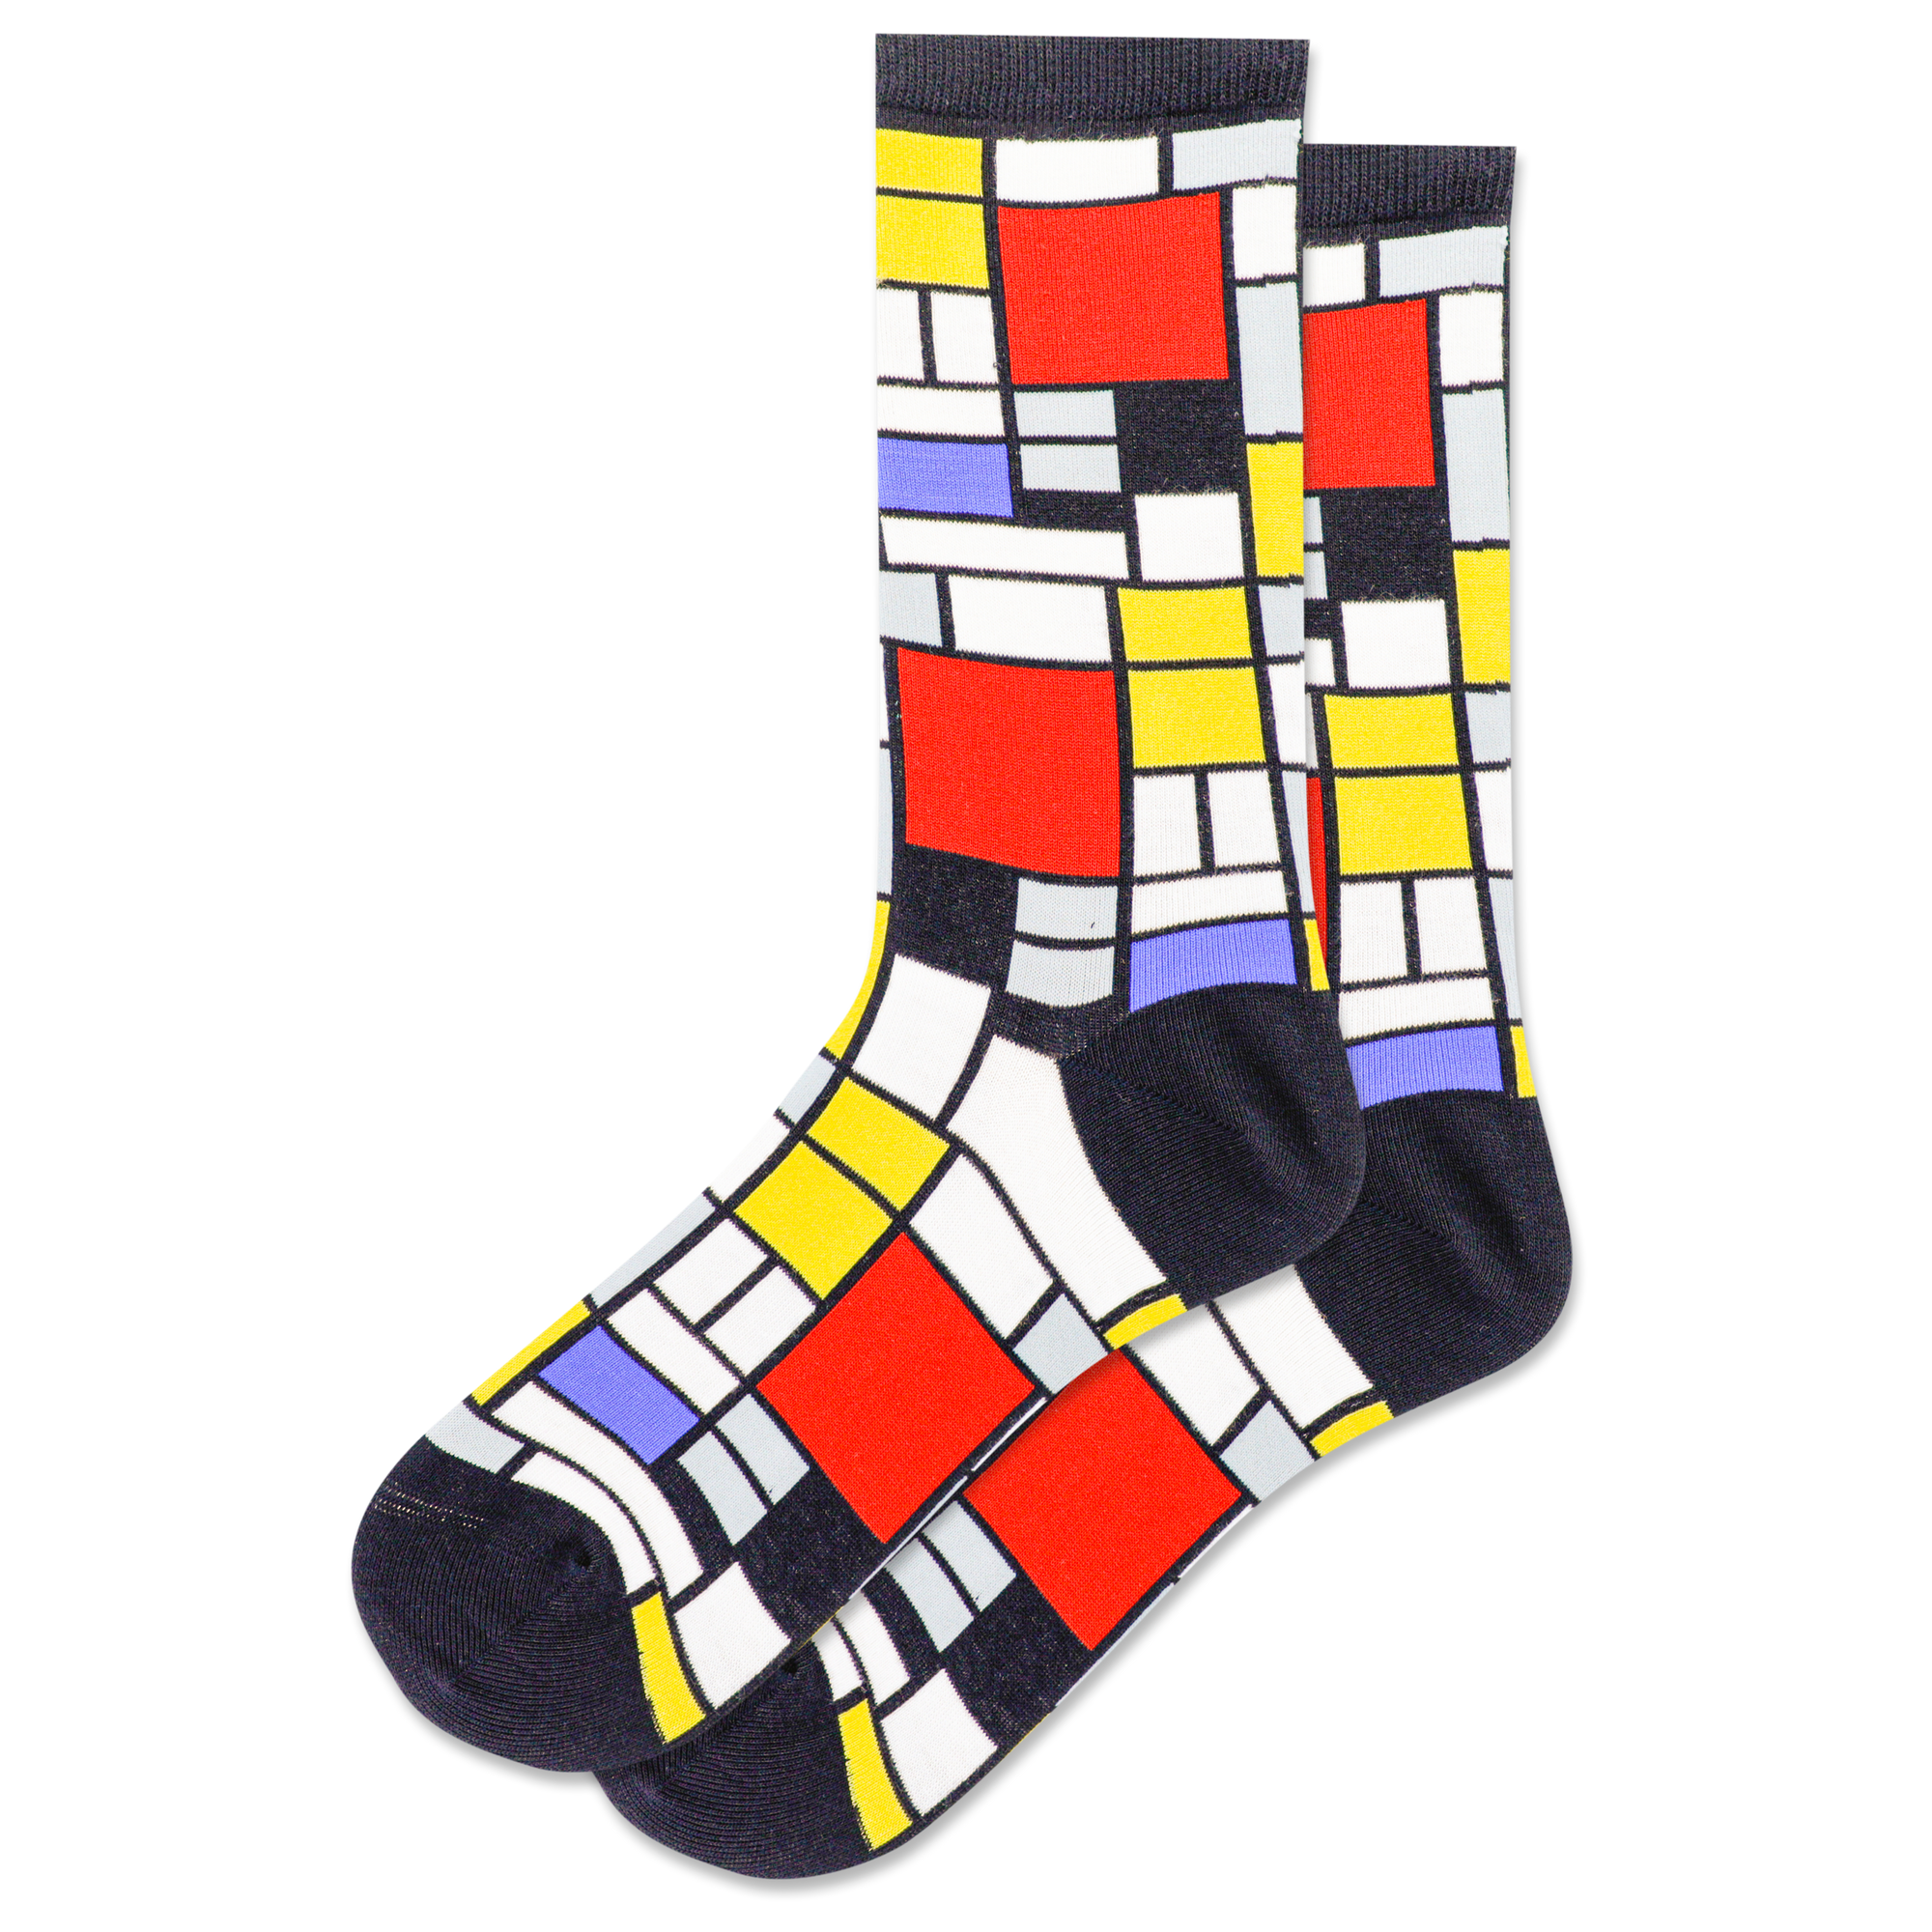 flatlay of geometric black, white, and primary color socks reminiscent of the modern art of Piet Mondrian